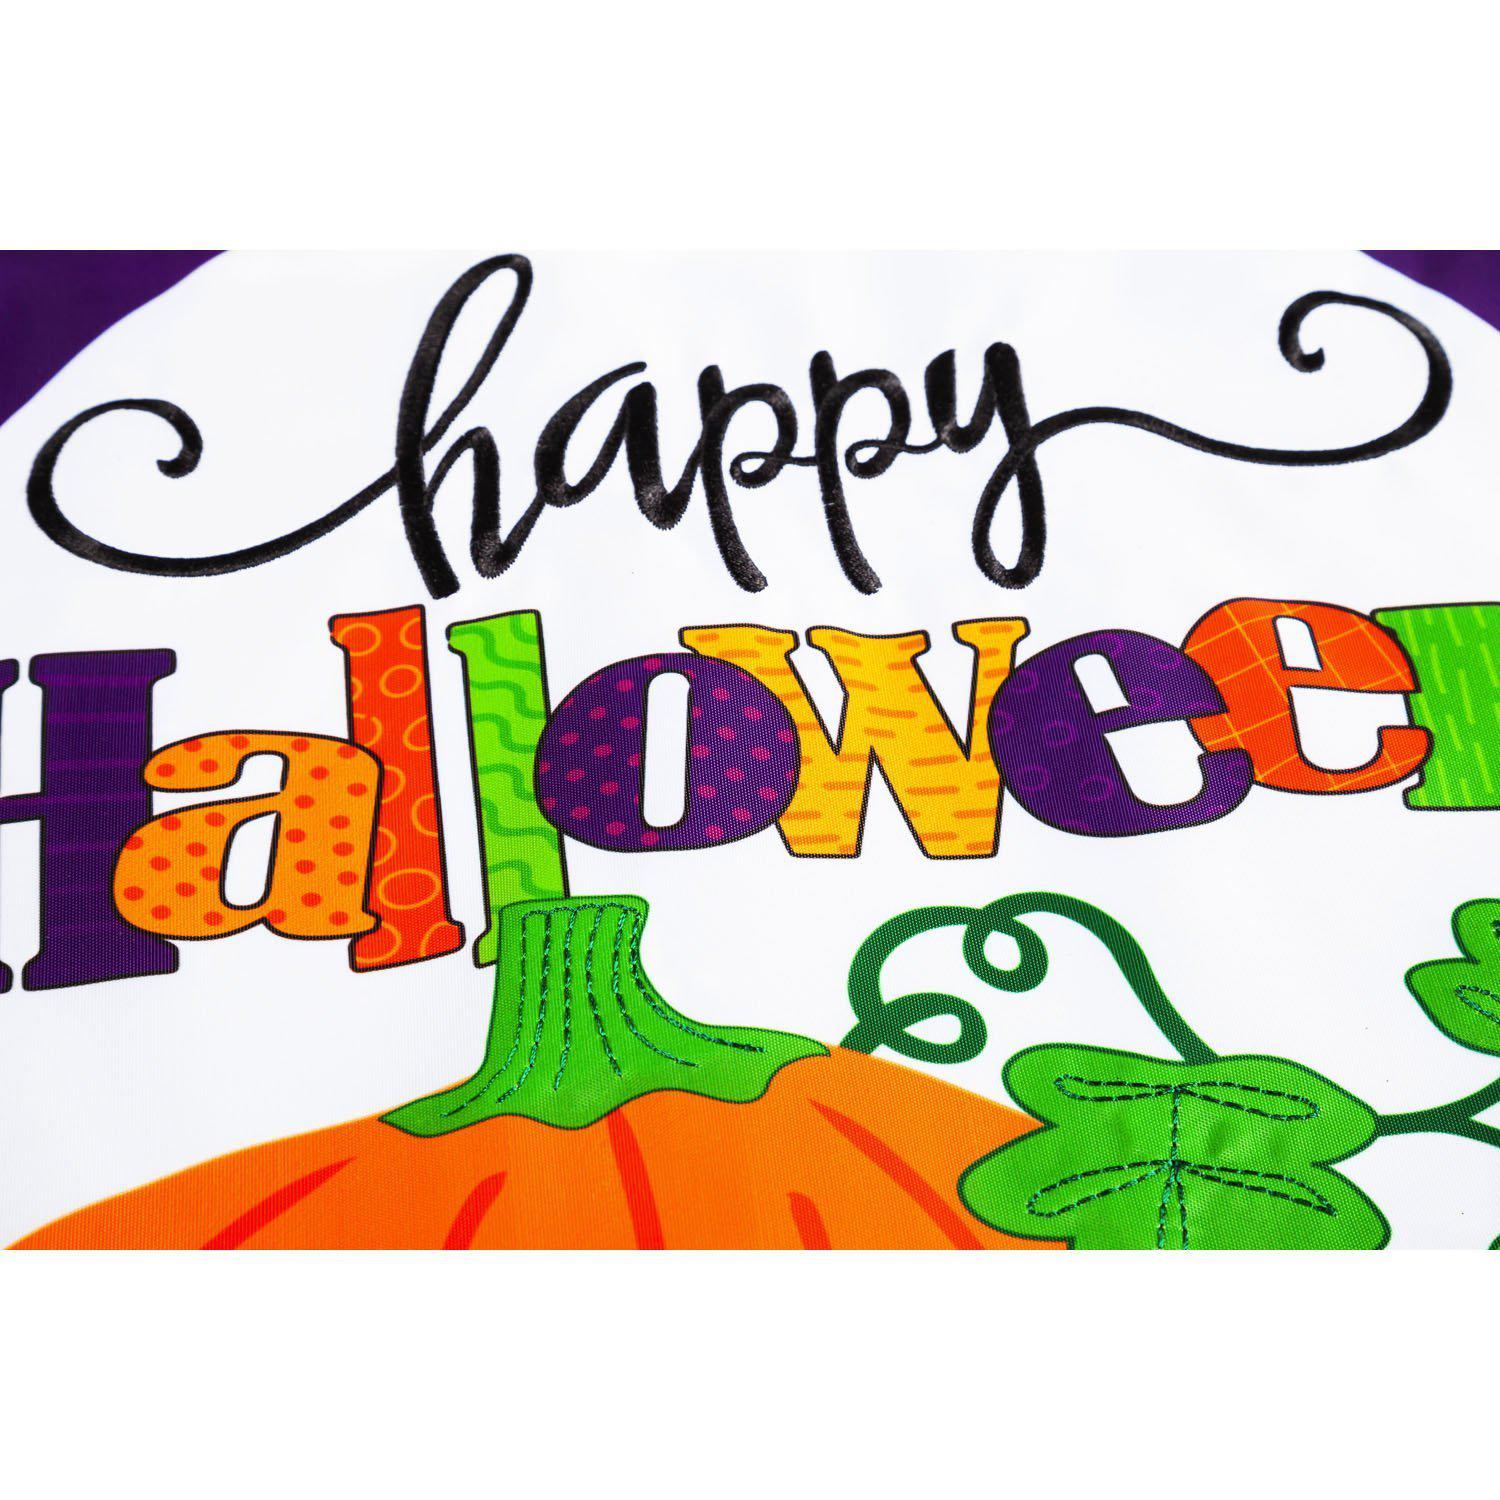 The Halloween Jack-O-Lanterns garden flag features two jolly jack-o-lanterns and the words "Happy Halloween".